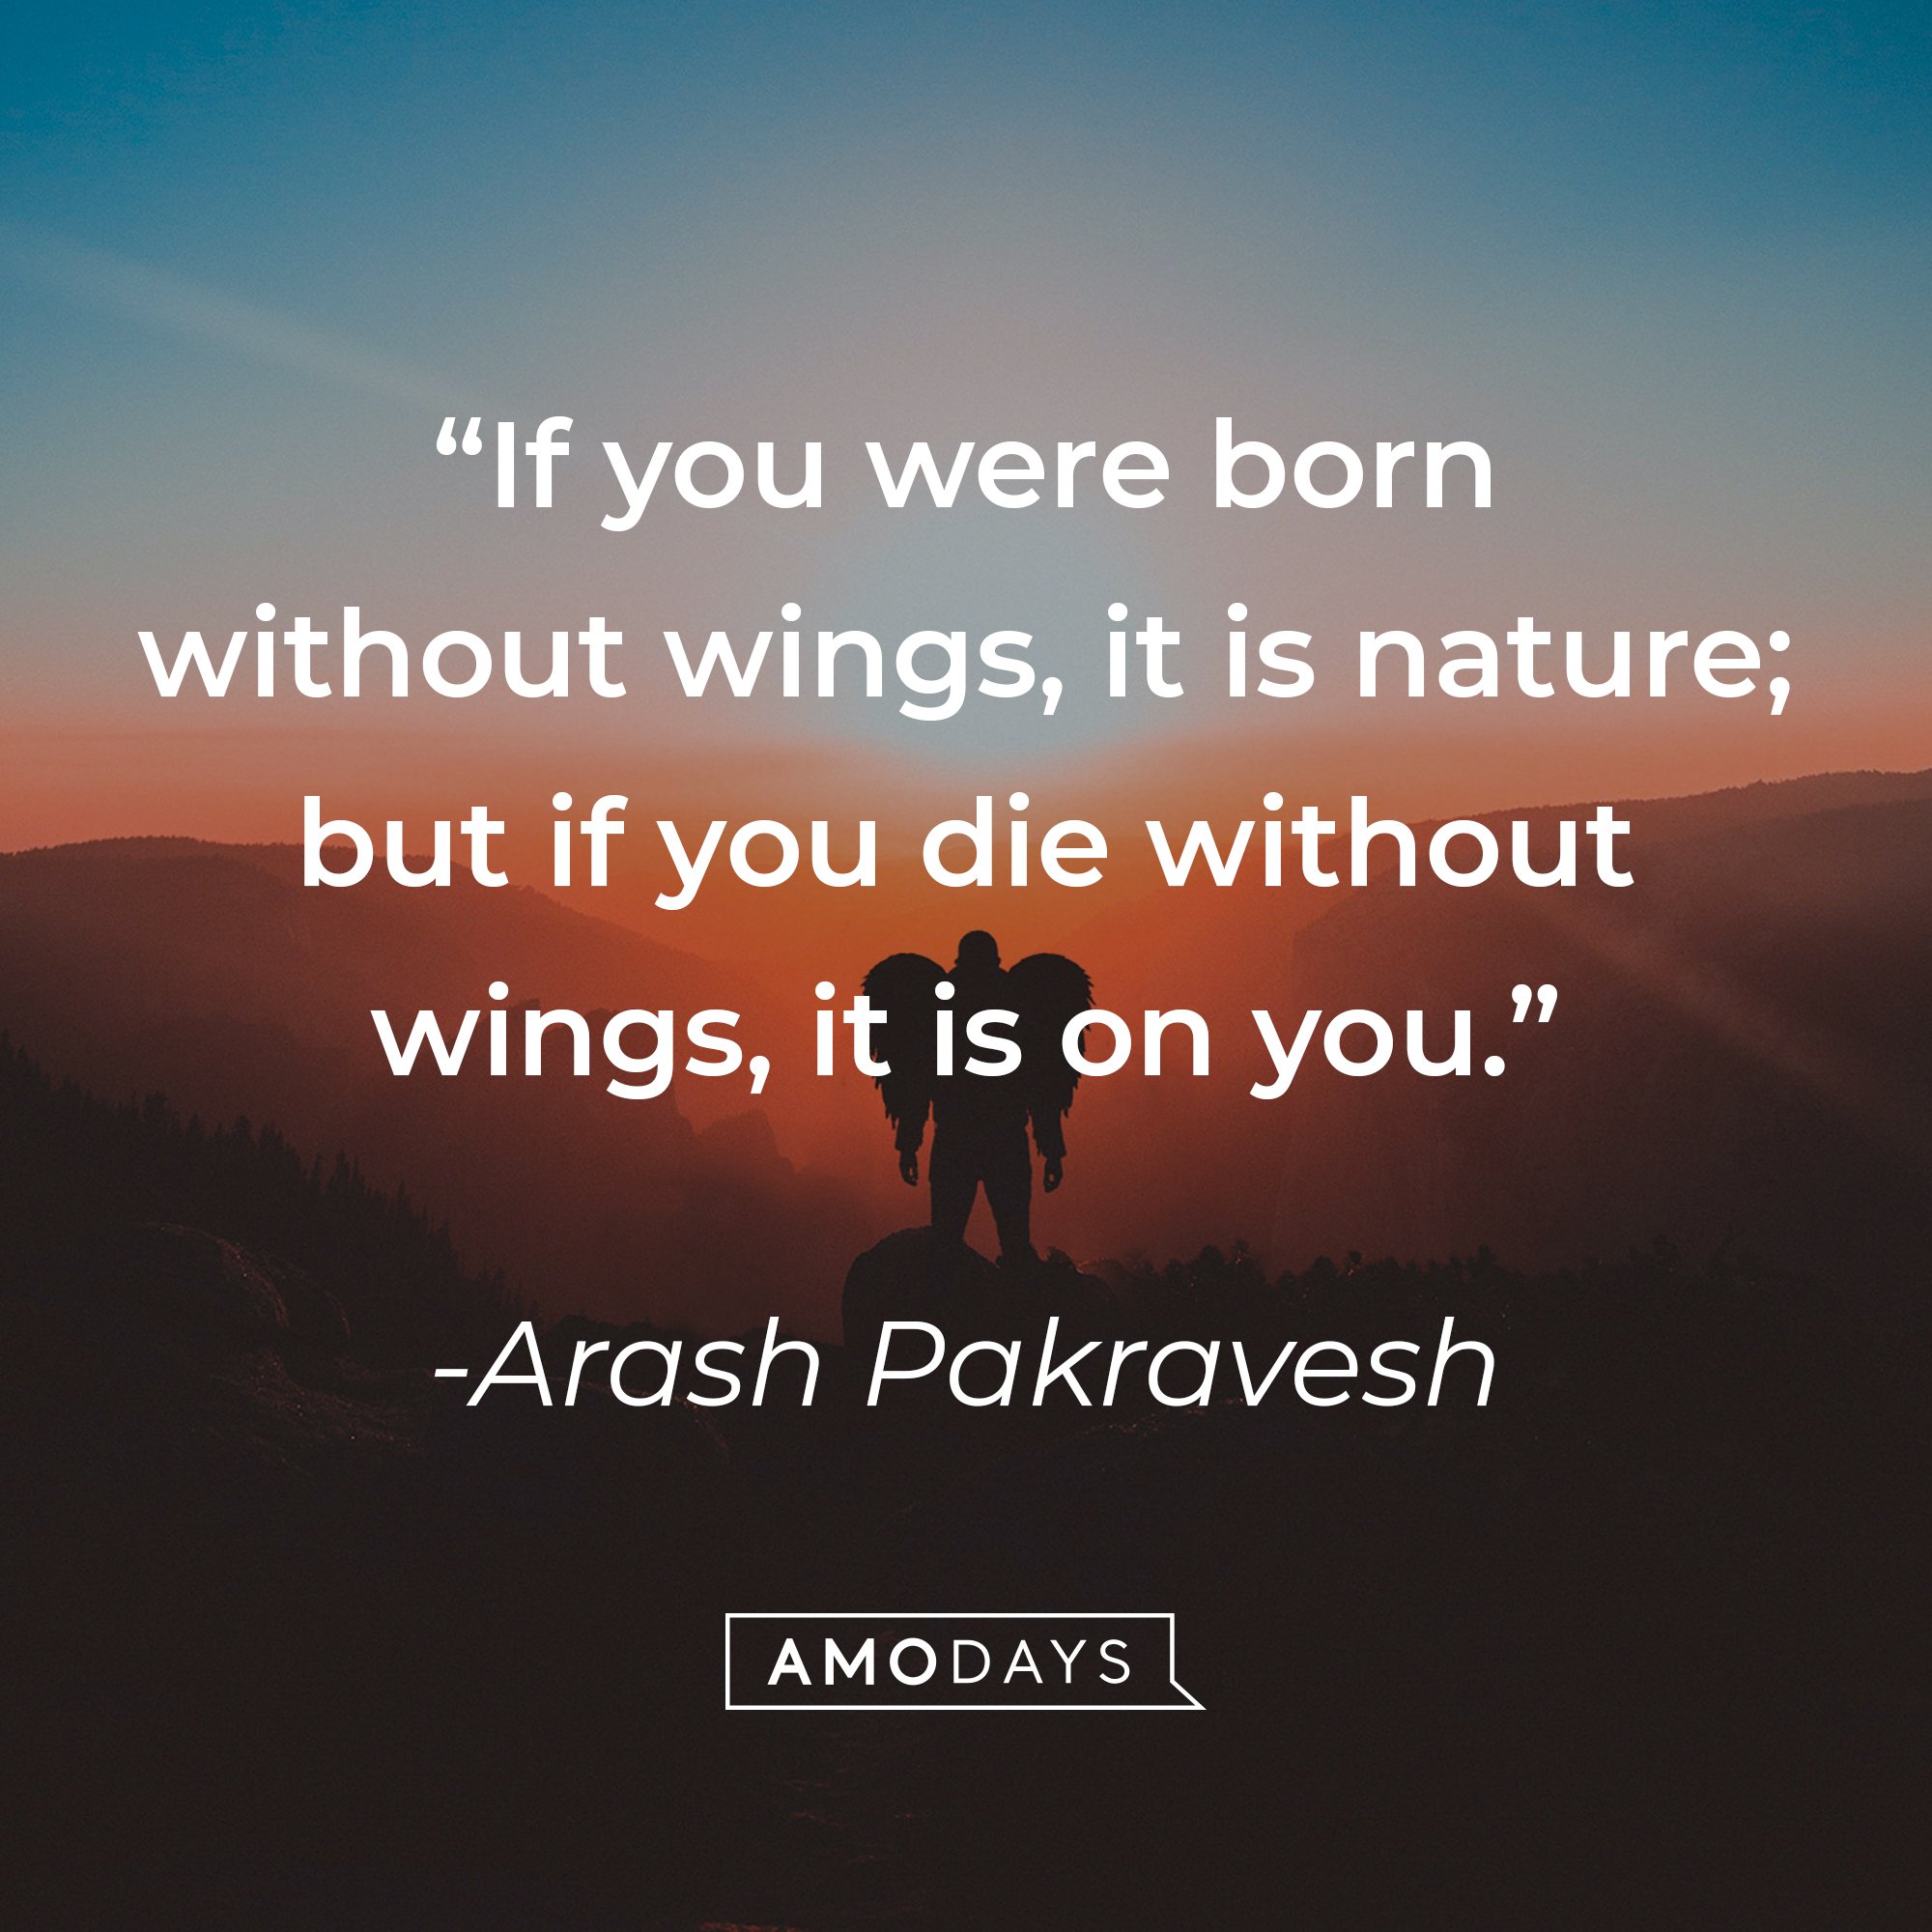 Arash Pakravesh's quote: "If you were born without wings, it is nature; but if you die without wings, it is on you." | Image: AmoDays